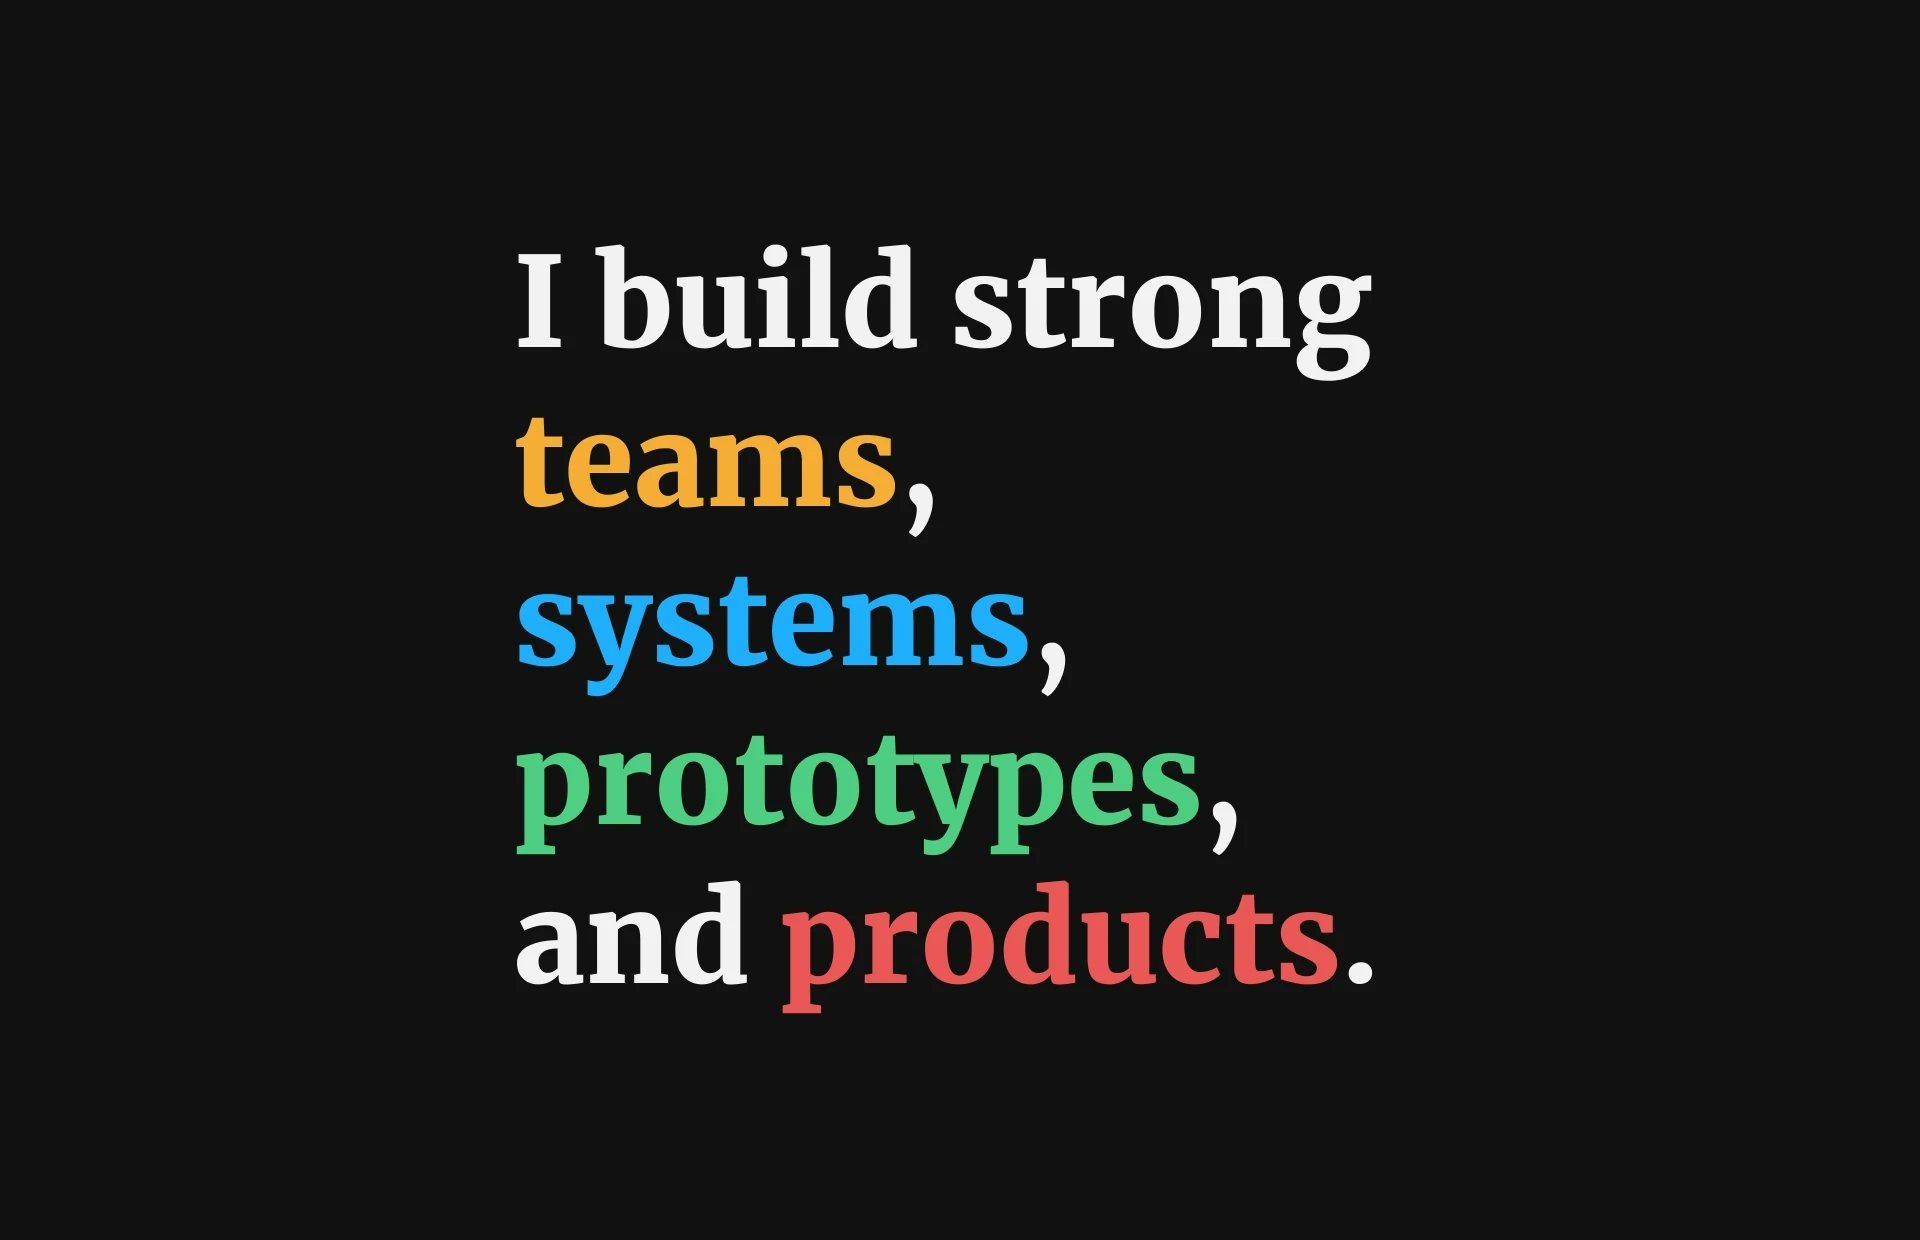 text reading 'I build strong teams, systems, prototypes and products' with each key work highlighted in a different color